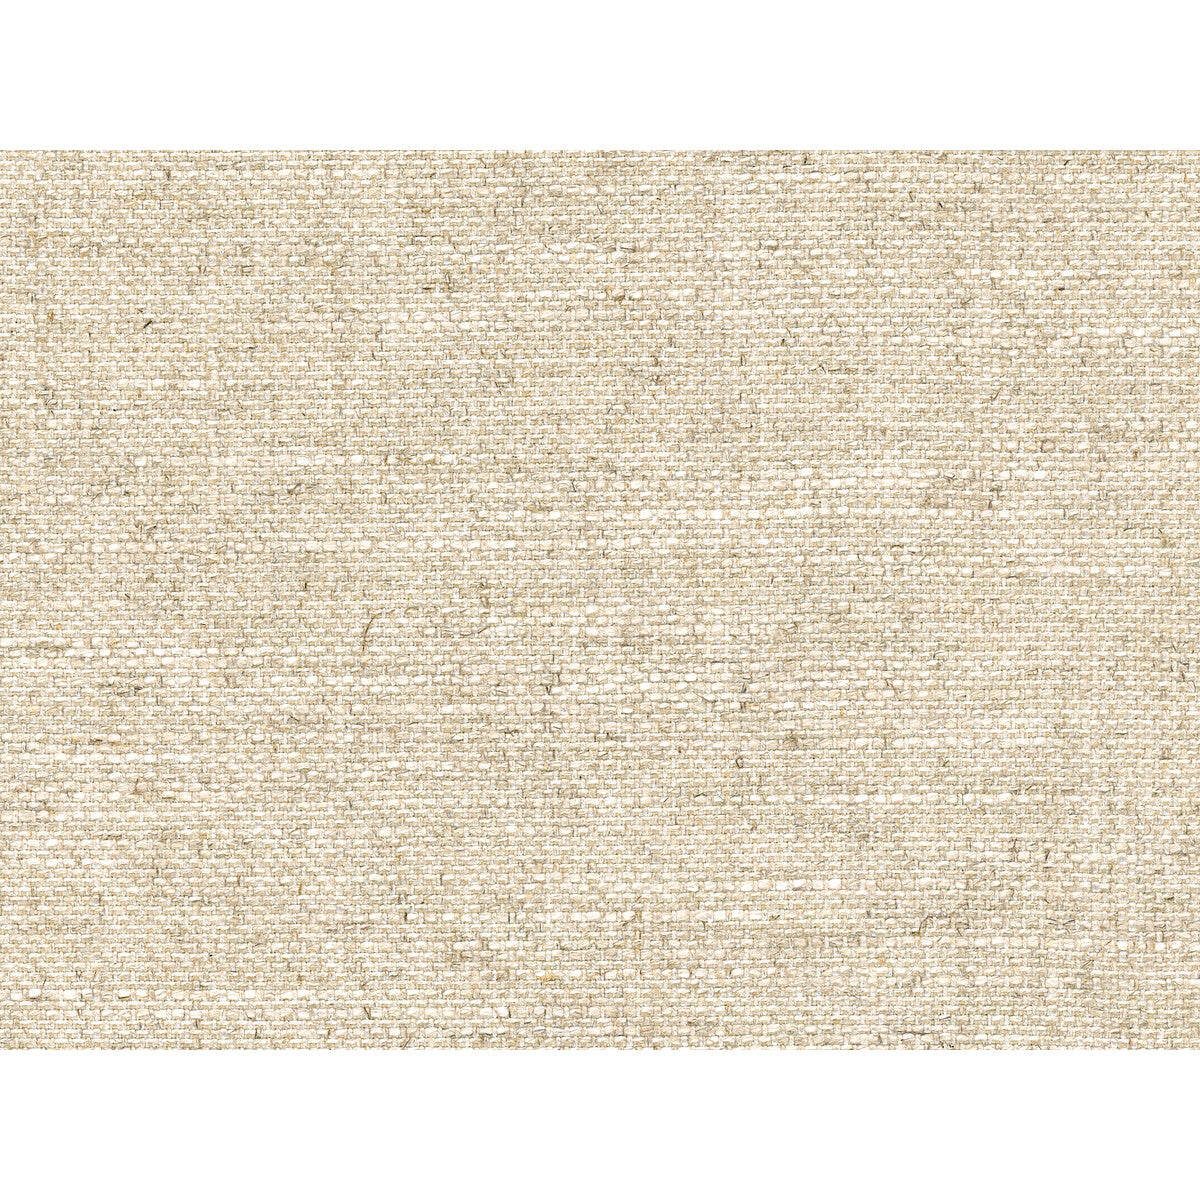 Everyday Lux fabric in oyster color - pattern 29619.1116.0 - by Kravet Couture in the Modern Colors III collection